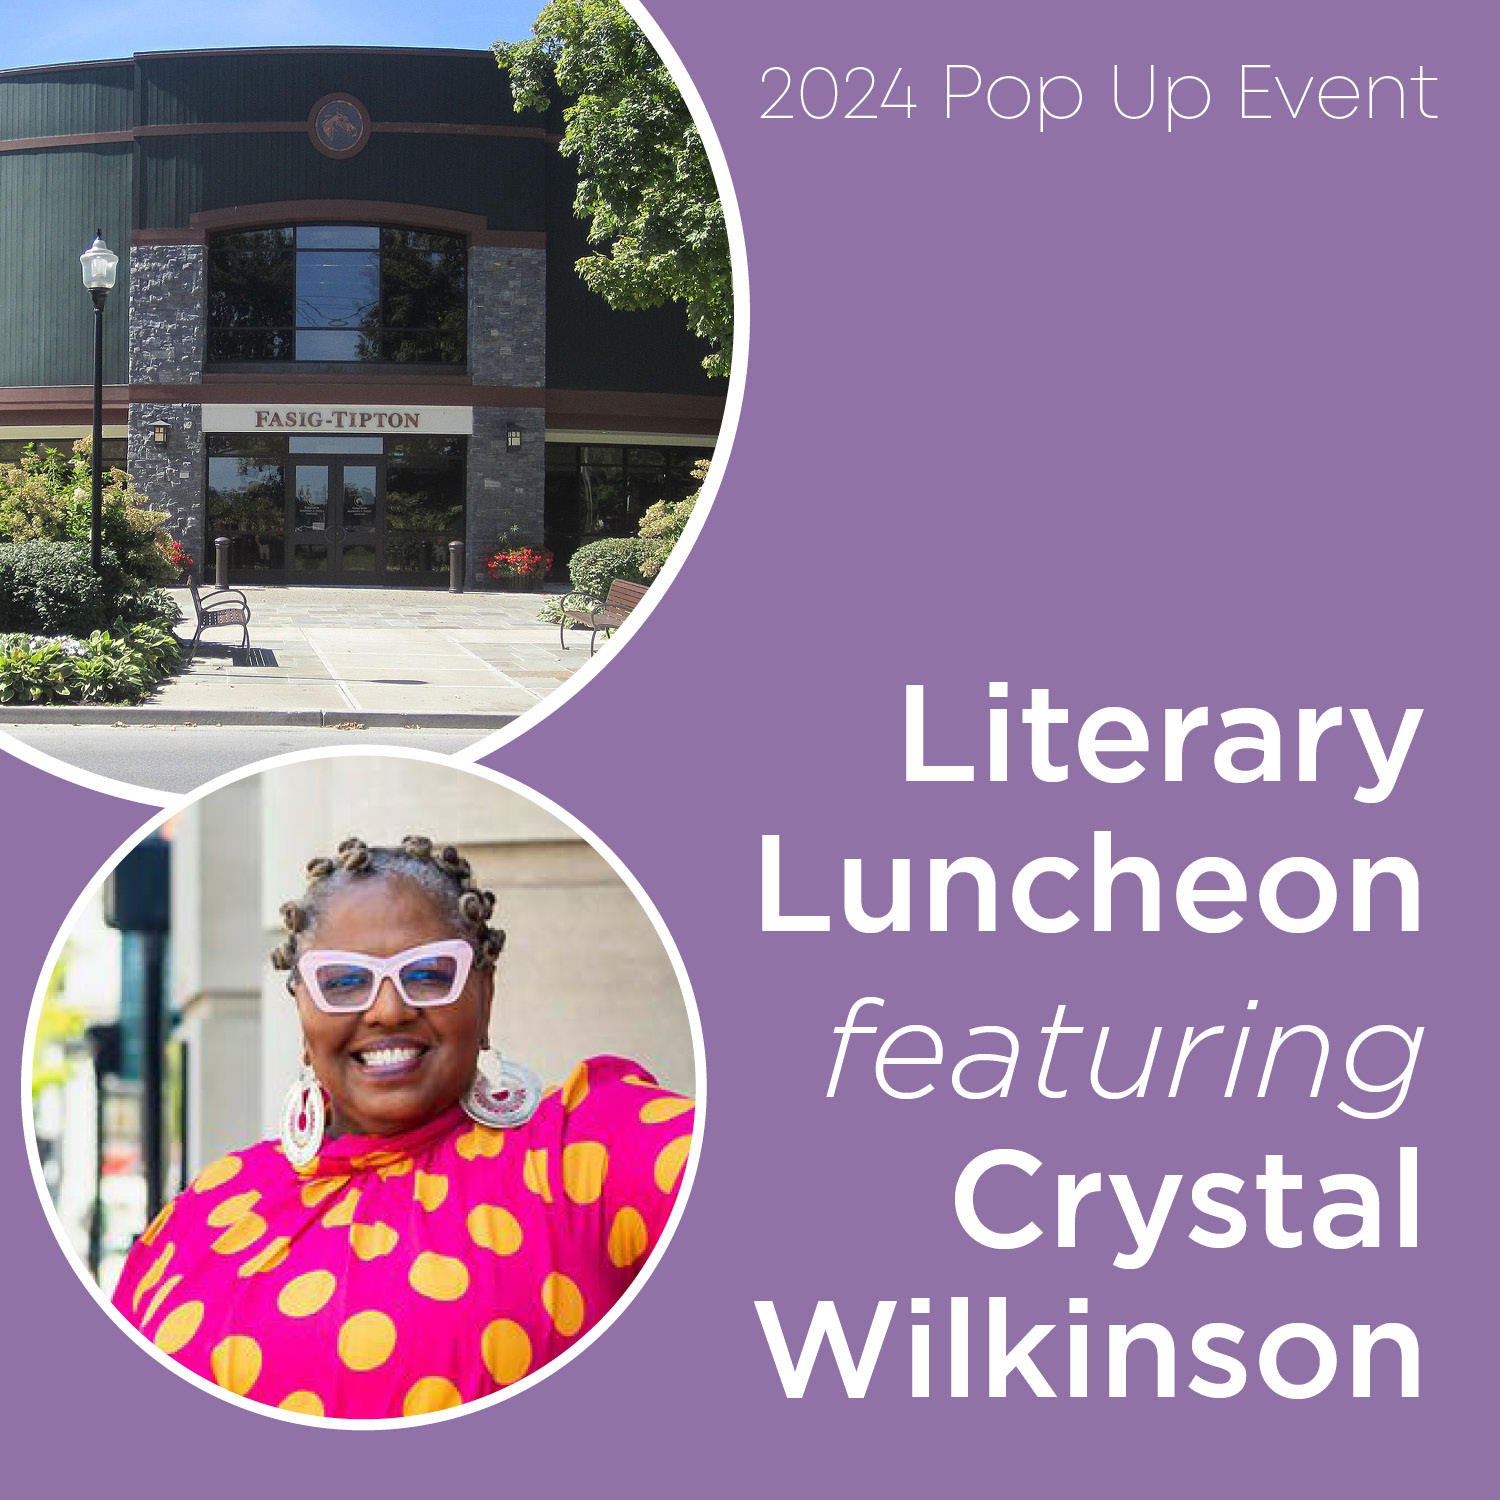 Literary Luncheon featuring Crystal Wilkinson